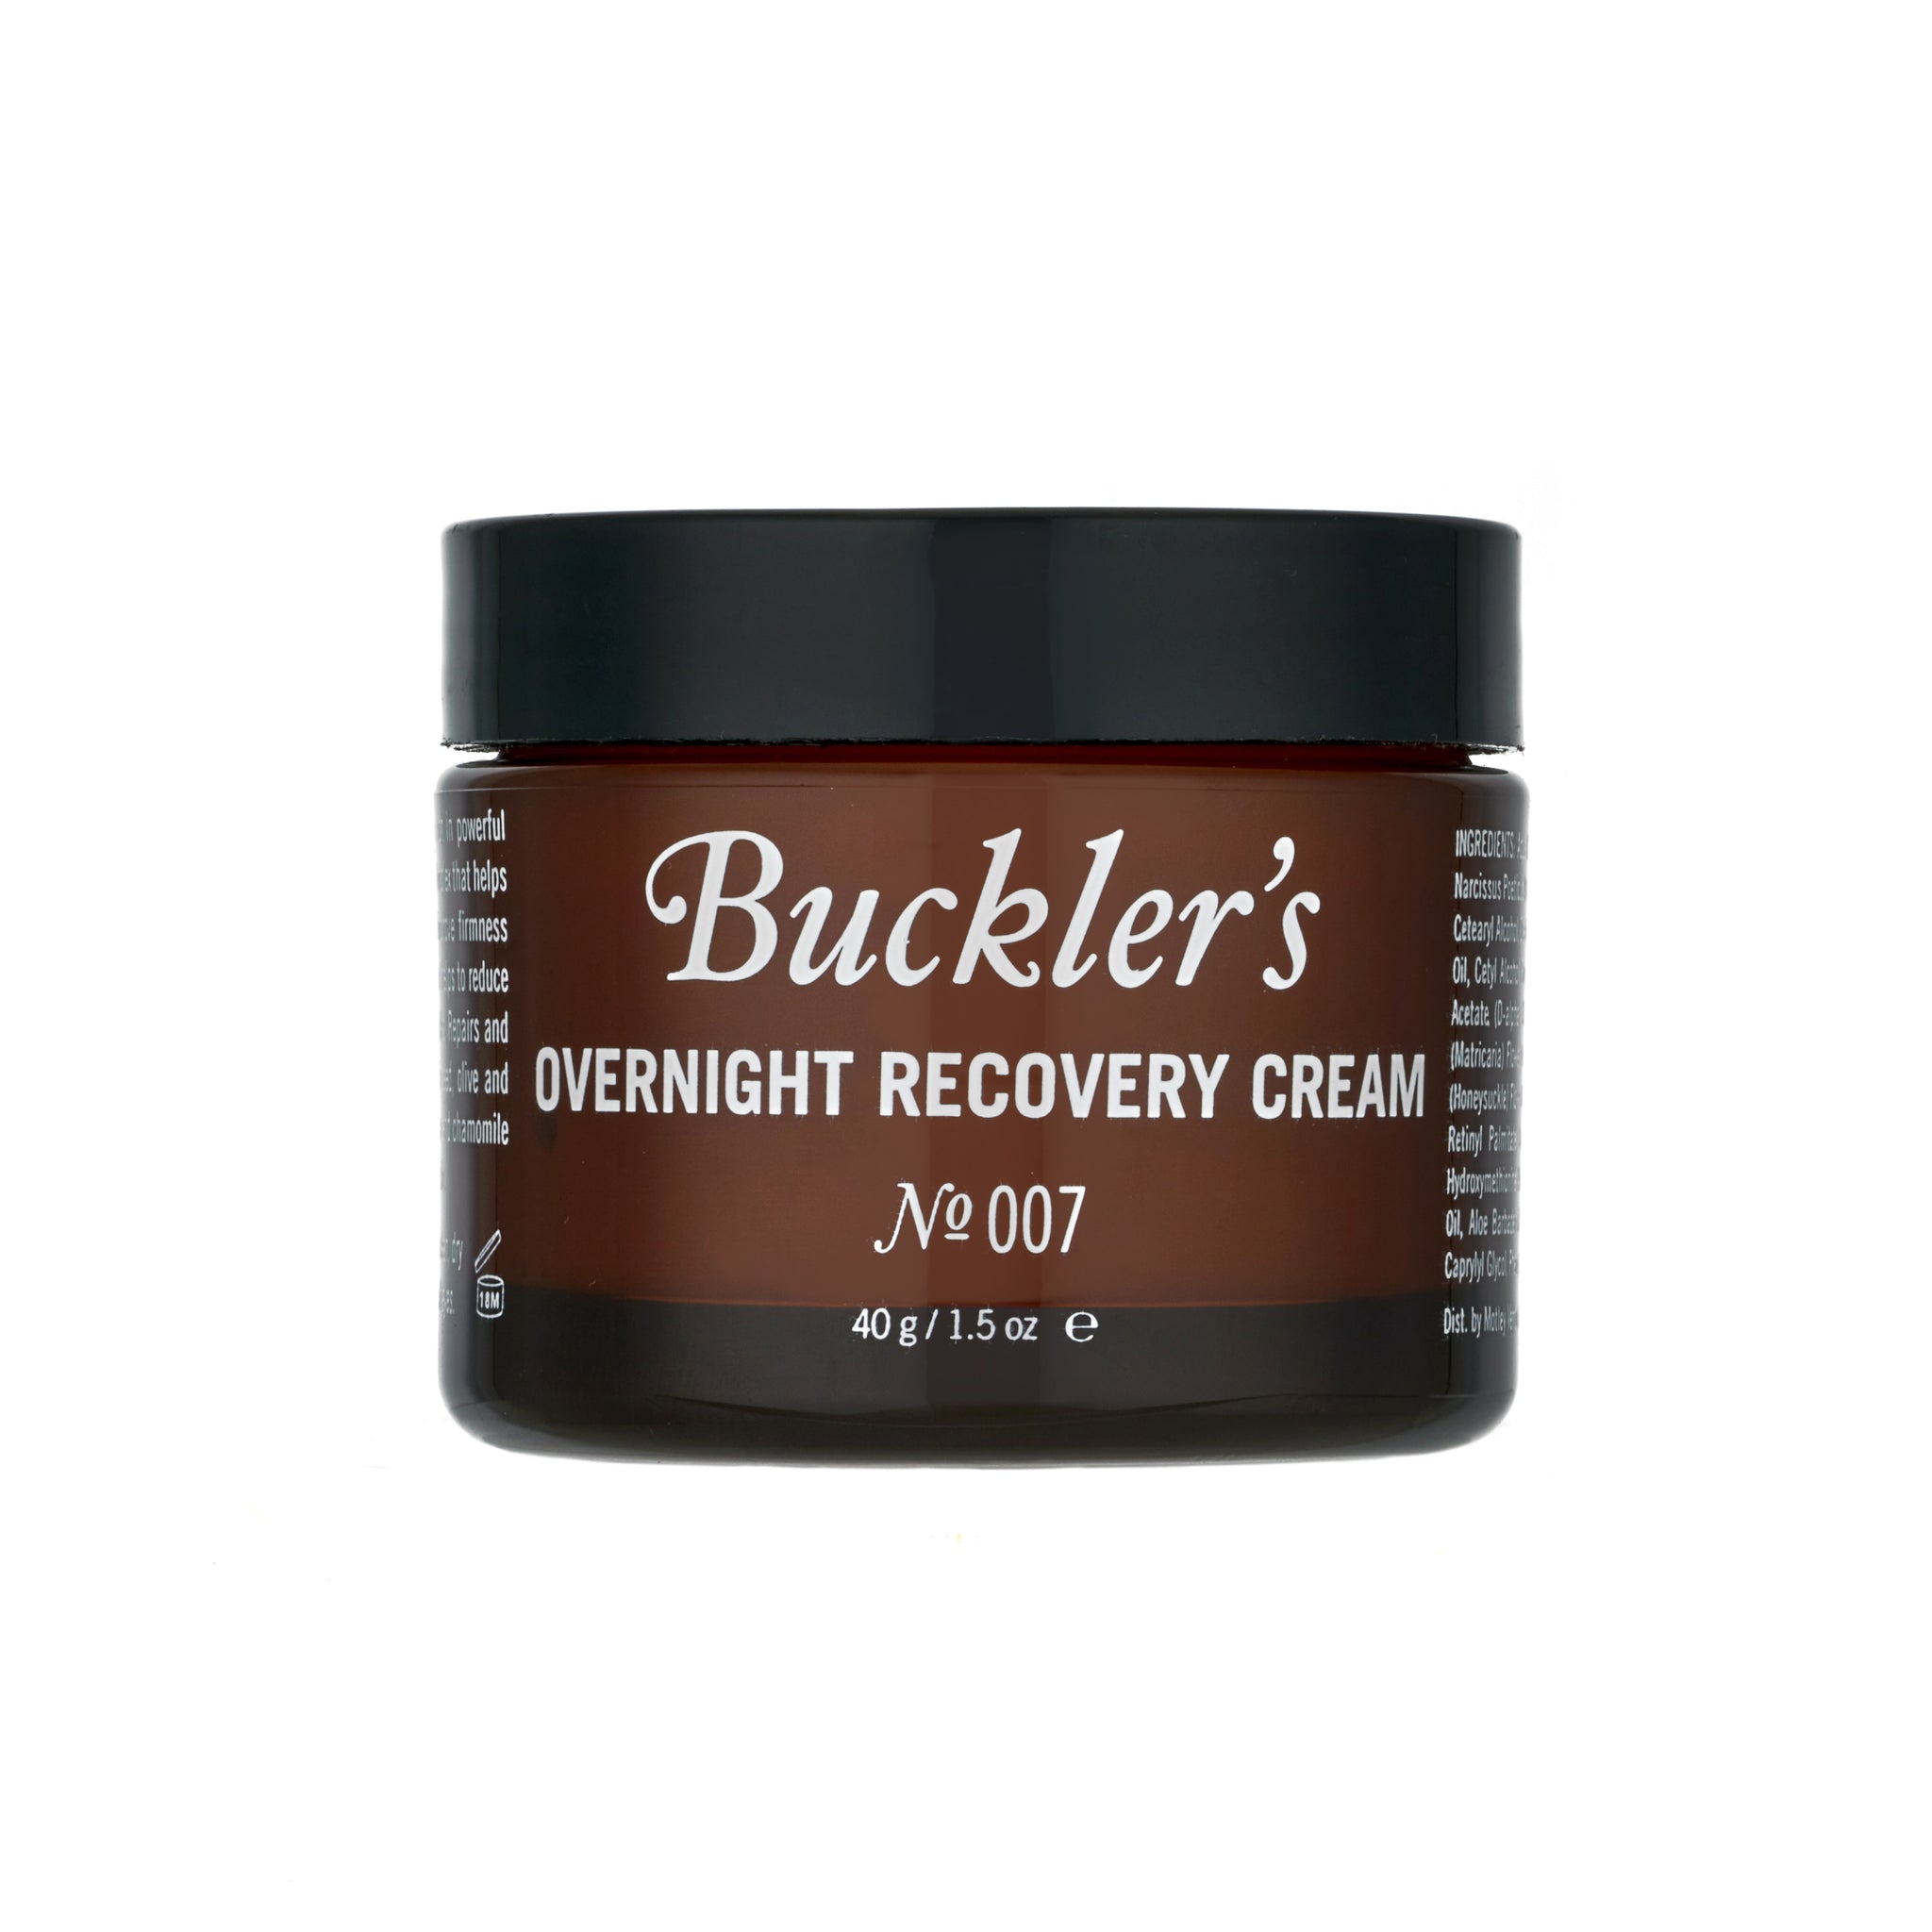 The Buckler's Overnight Recovery Cream in a brown glass jar with a black lid against a white background.